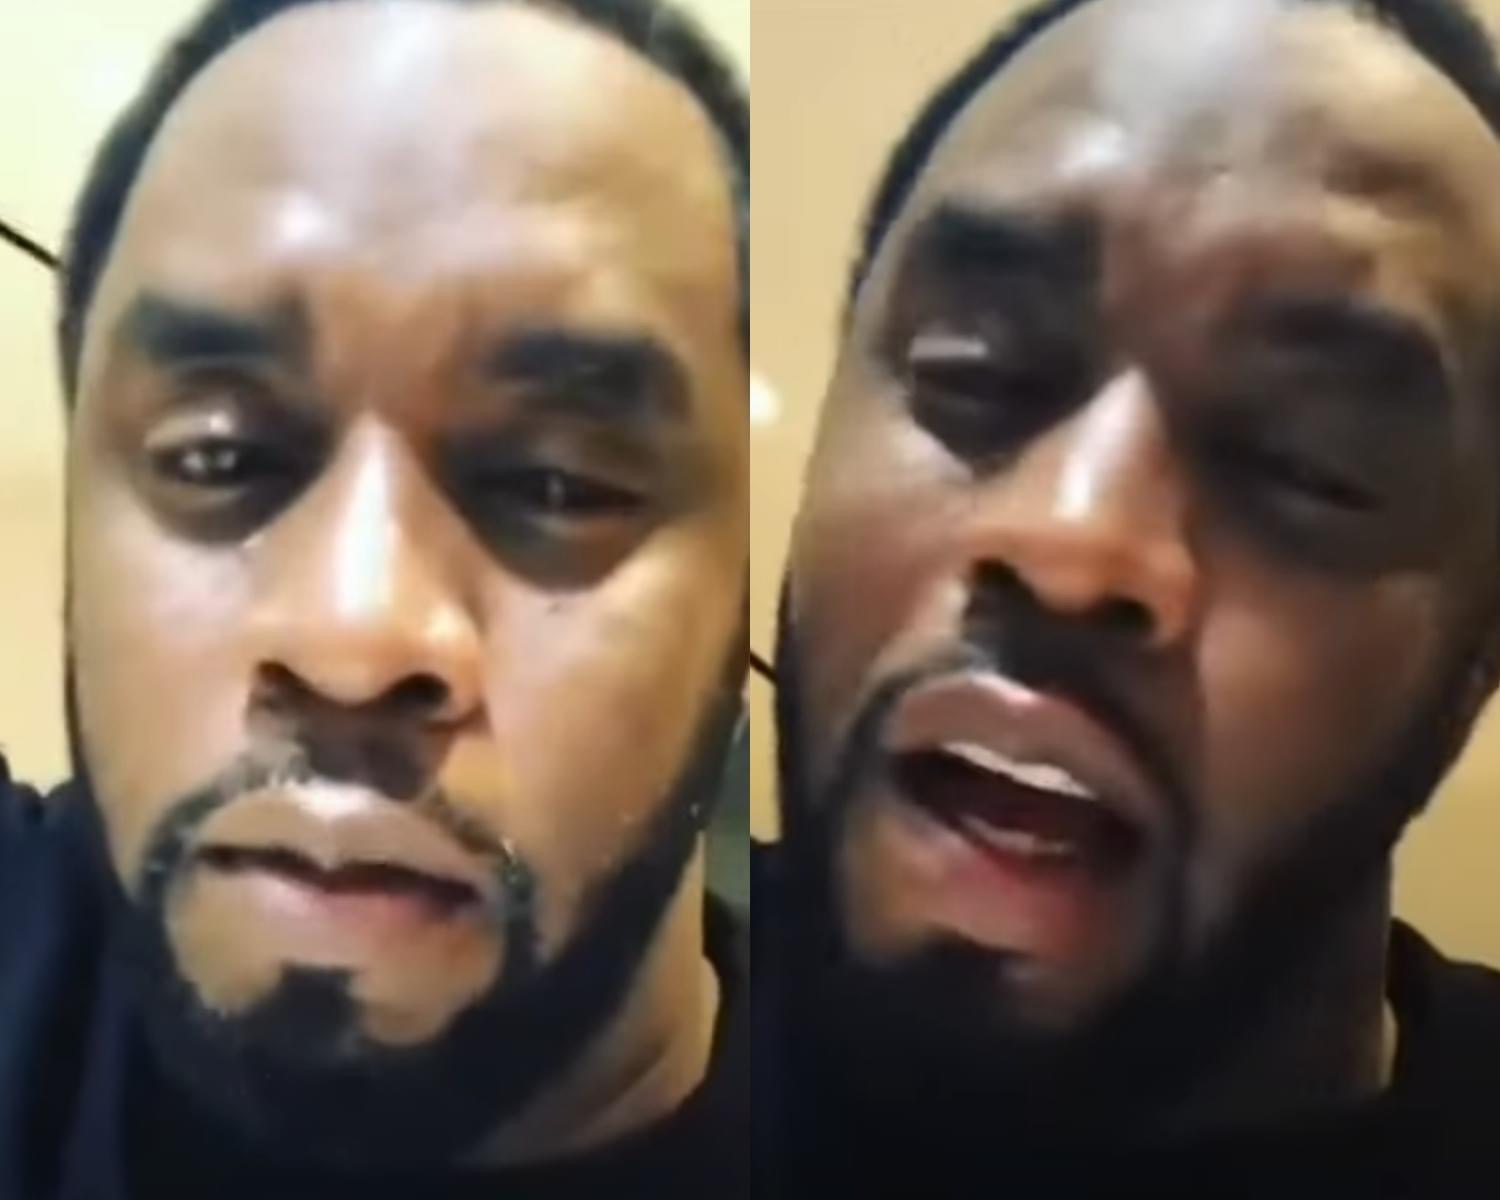 P Diddy Cries For 3.5 Hours & Tells Everybody Got To Cry: 700,000 dollars and your crying lmao